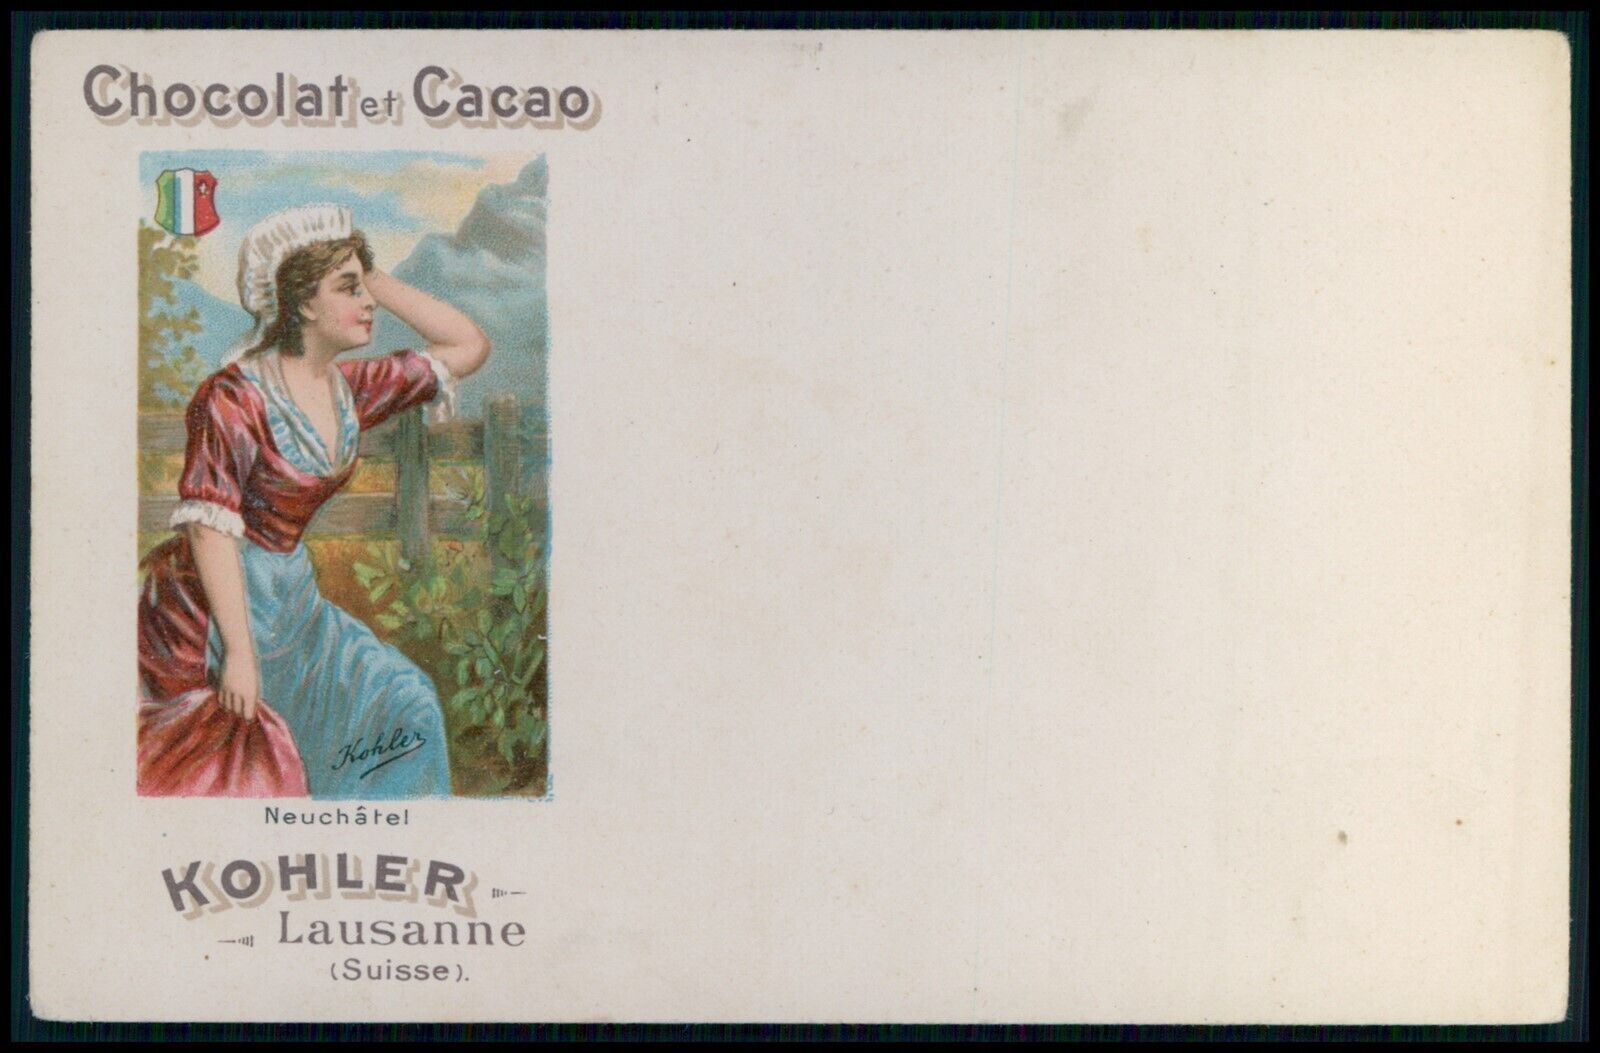 aa advertising Kohler cocoa and chocolate original old 1890s Swiss postcard